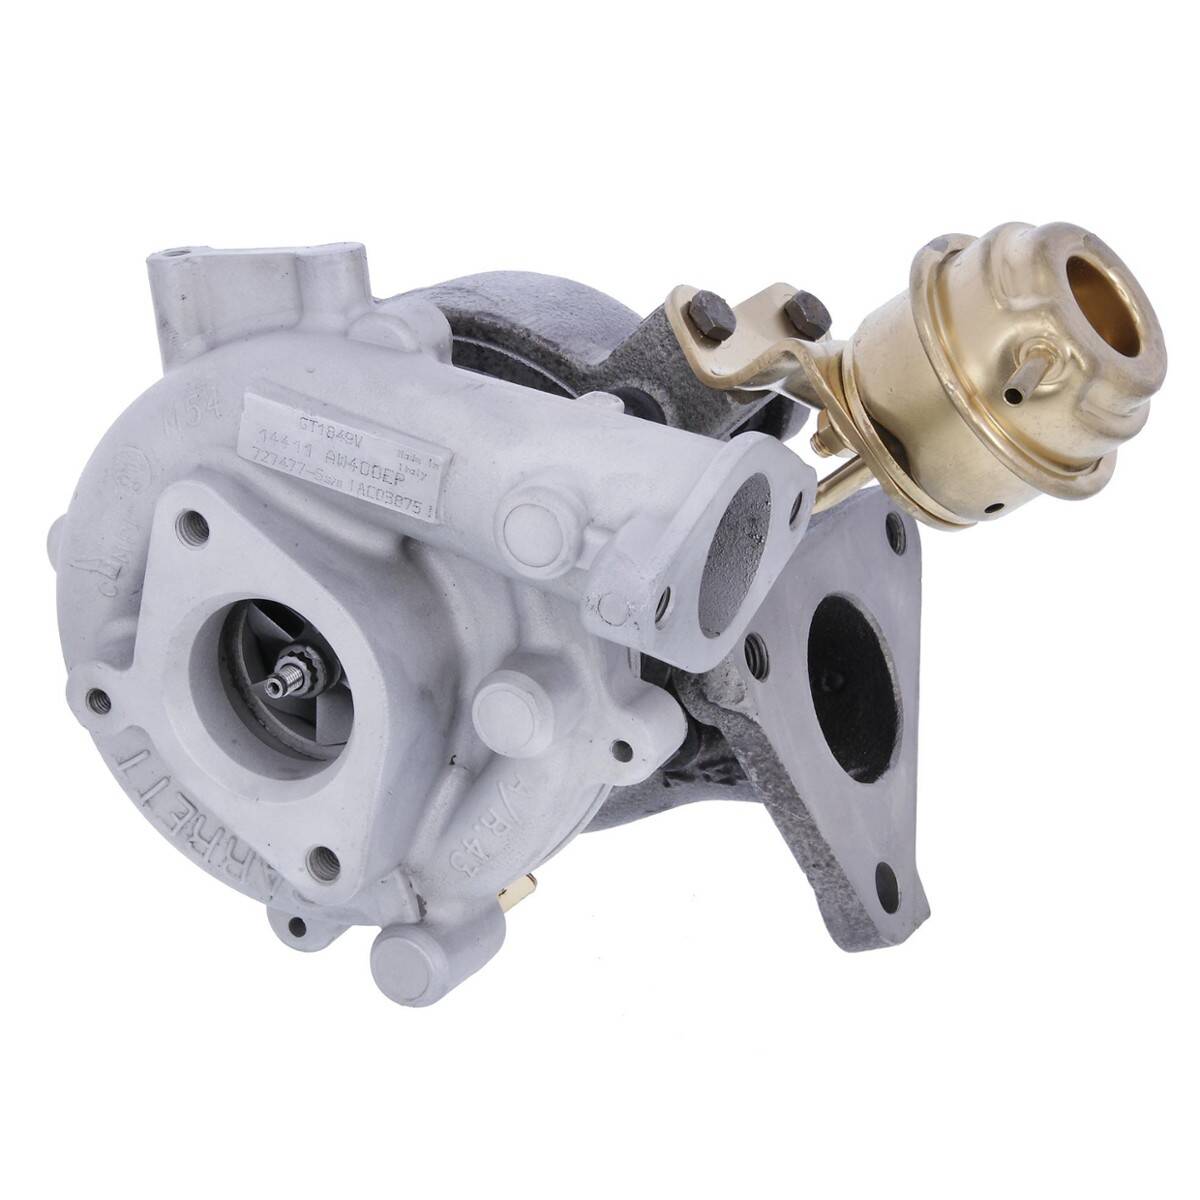 TURBOCHARGER TURBO REMANUFACTURED 717477